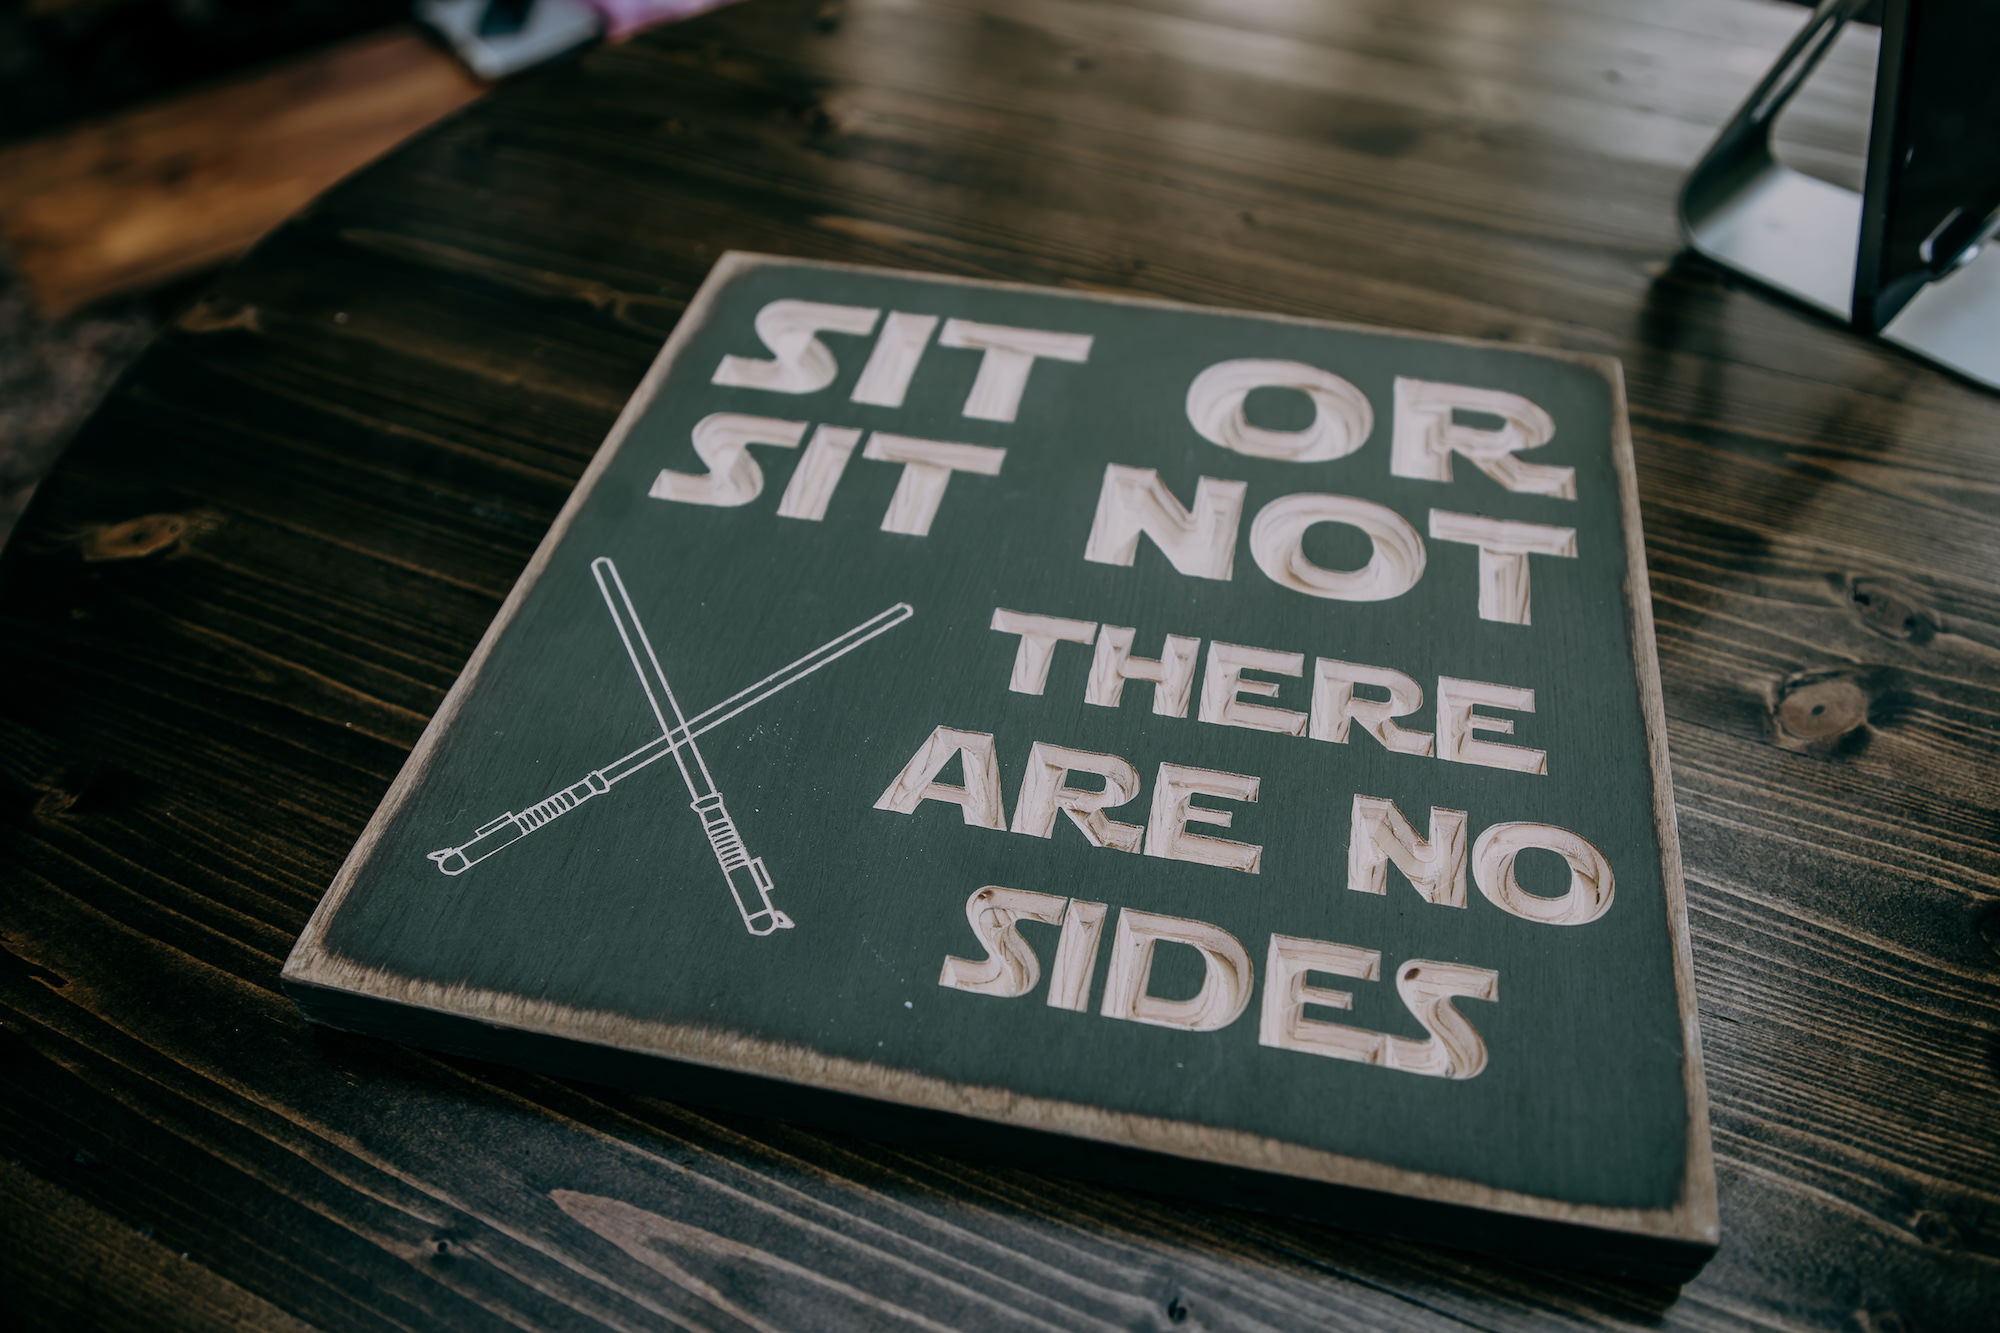 Boho Vintage Star Wars Wedding Sign, "Sit or Sit Not There Are No Sides"